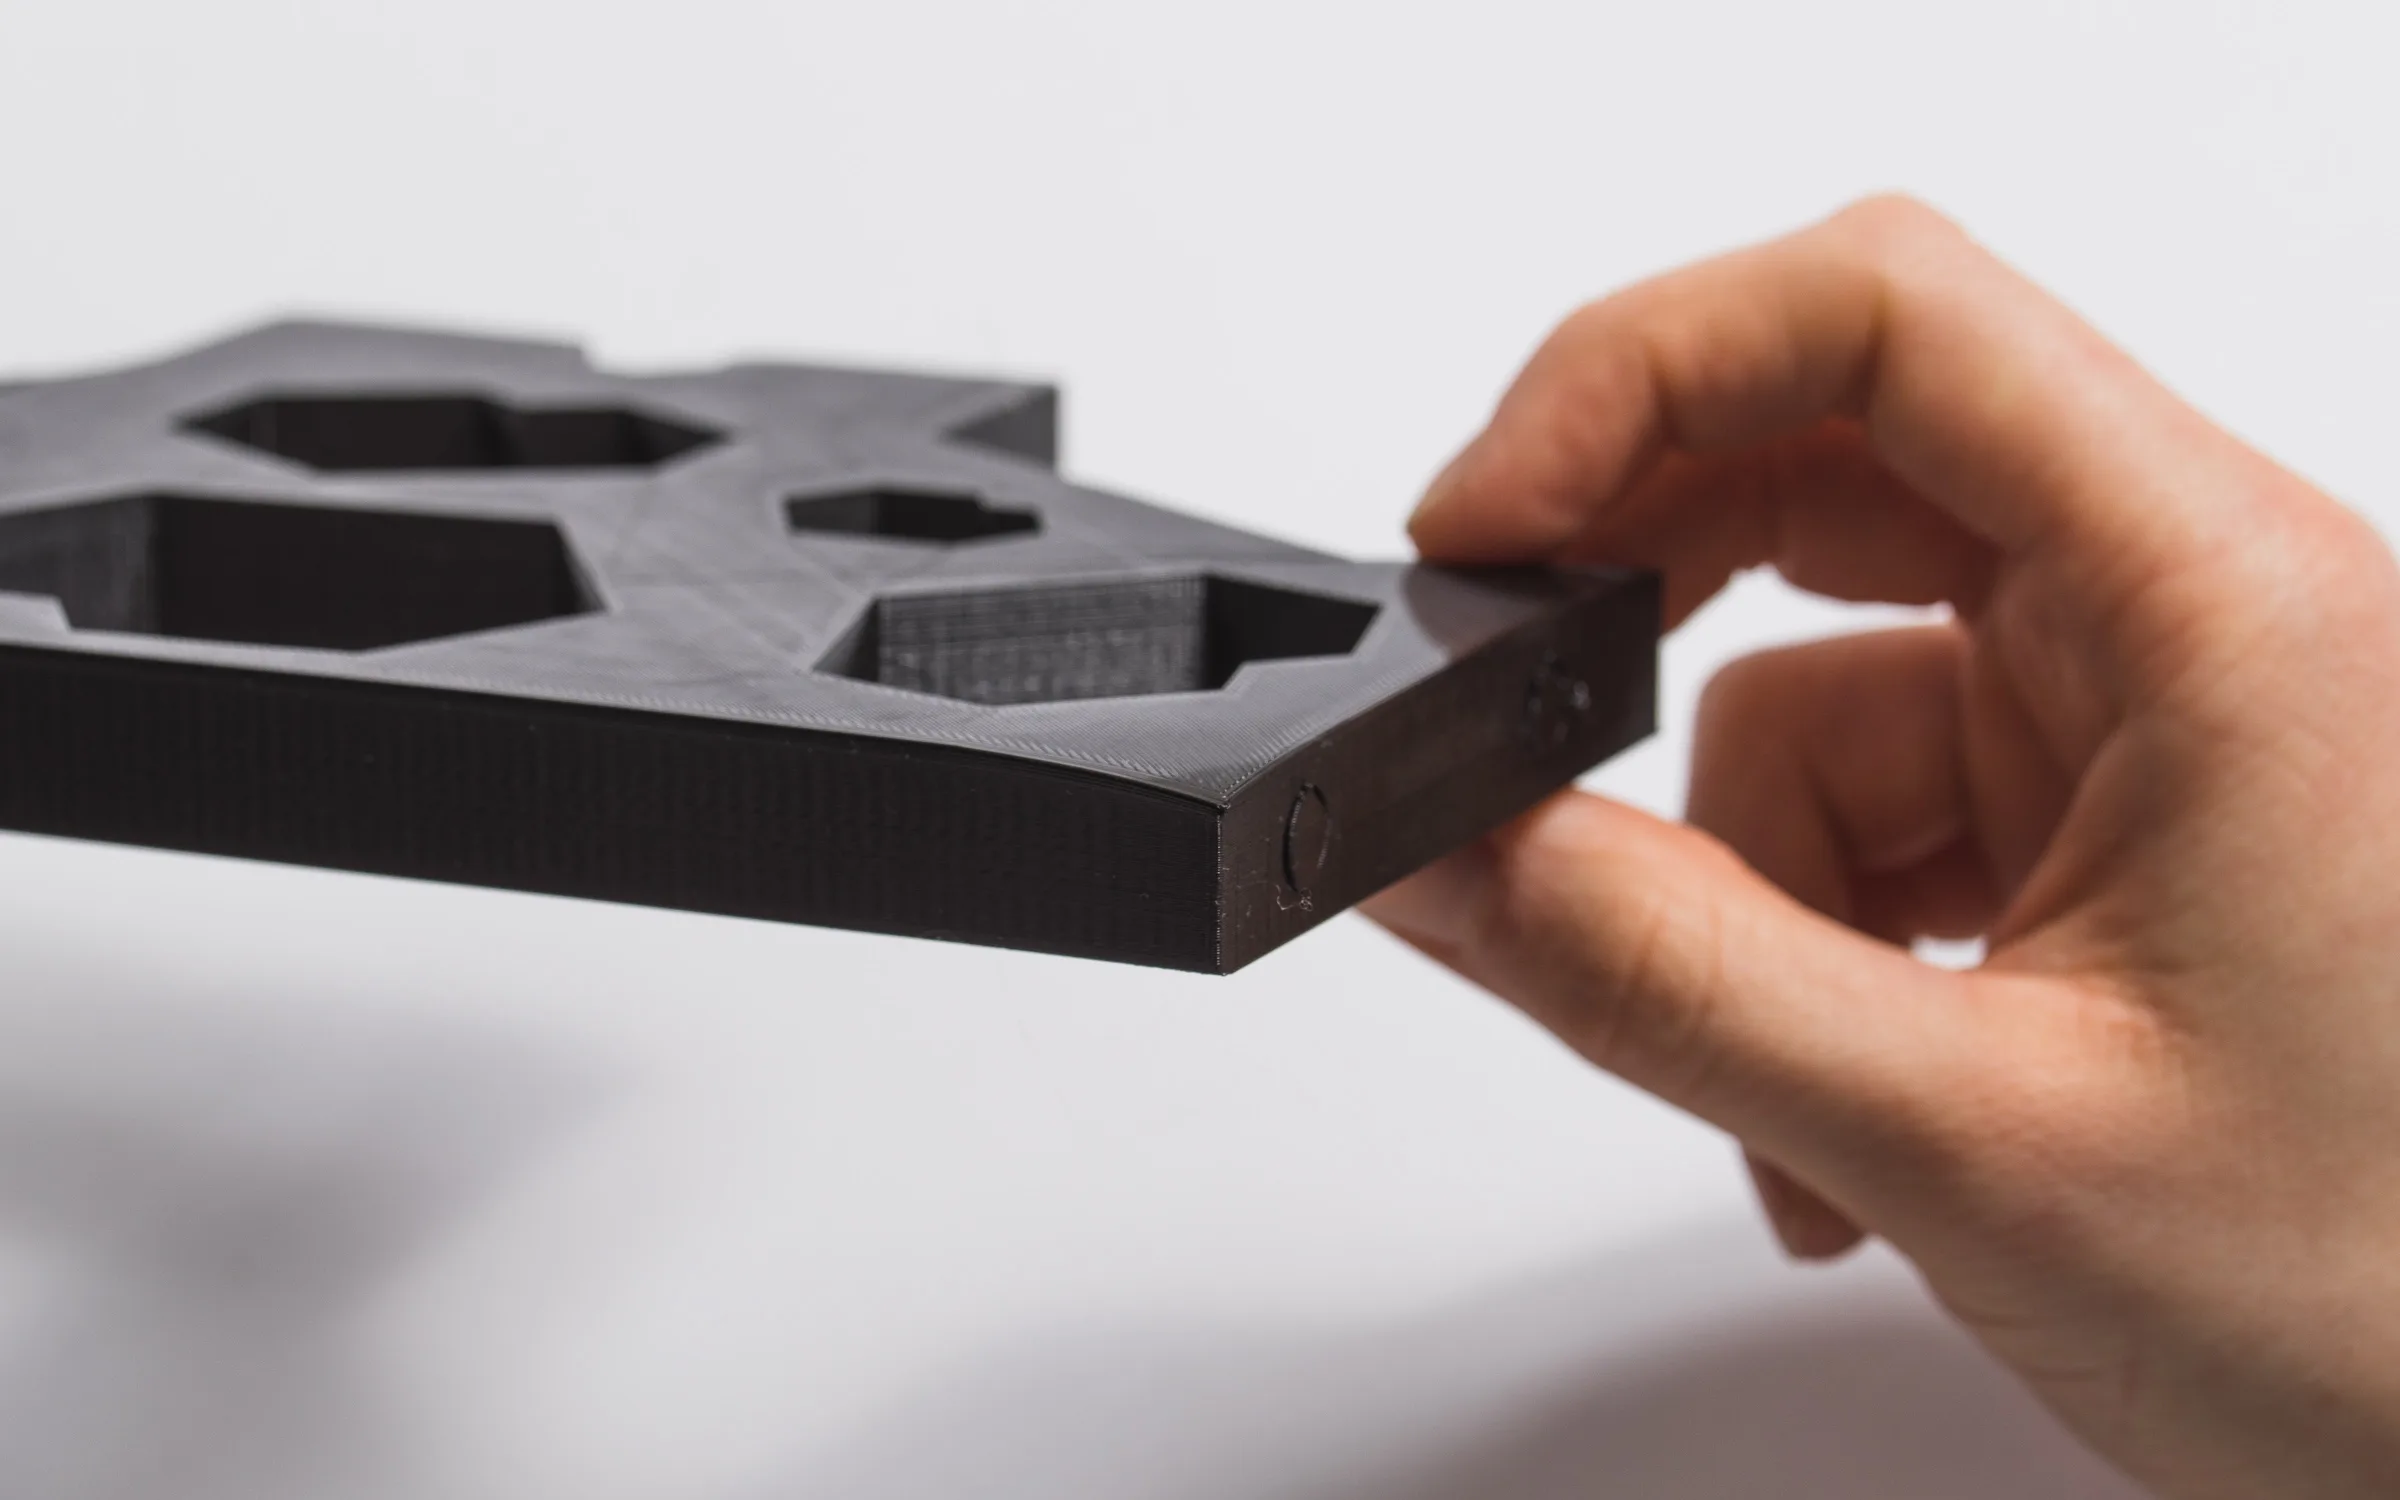 3D printing with PLA vs. ABS: What's the difference?